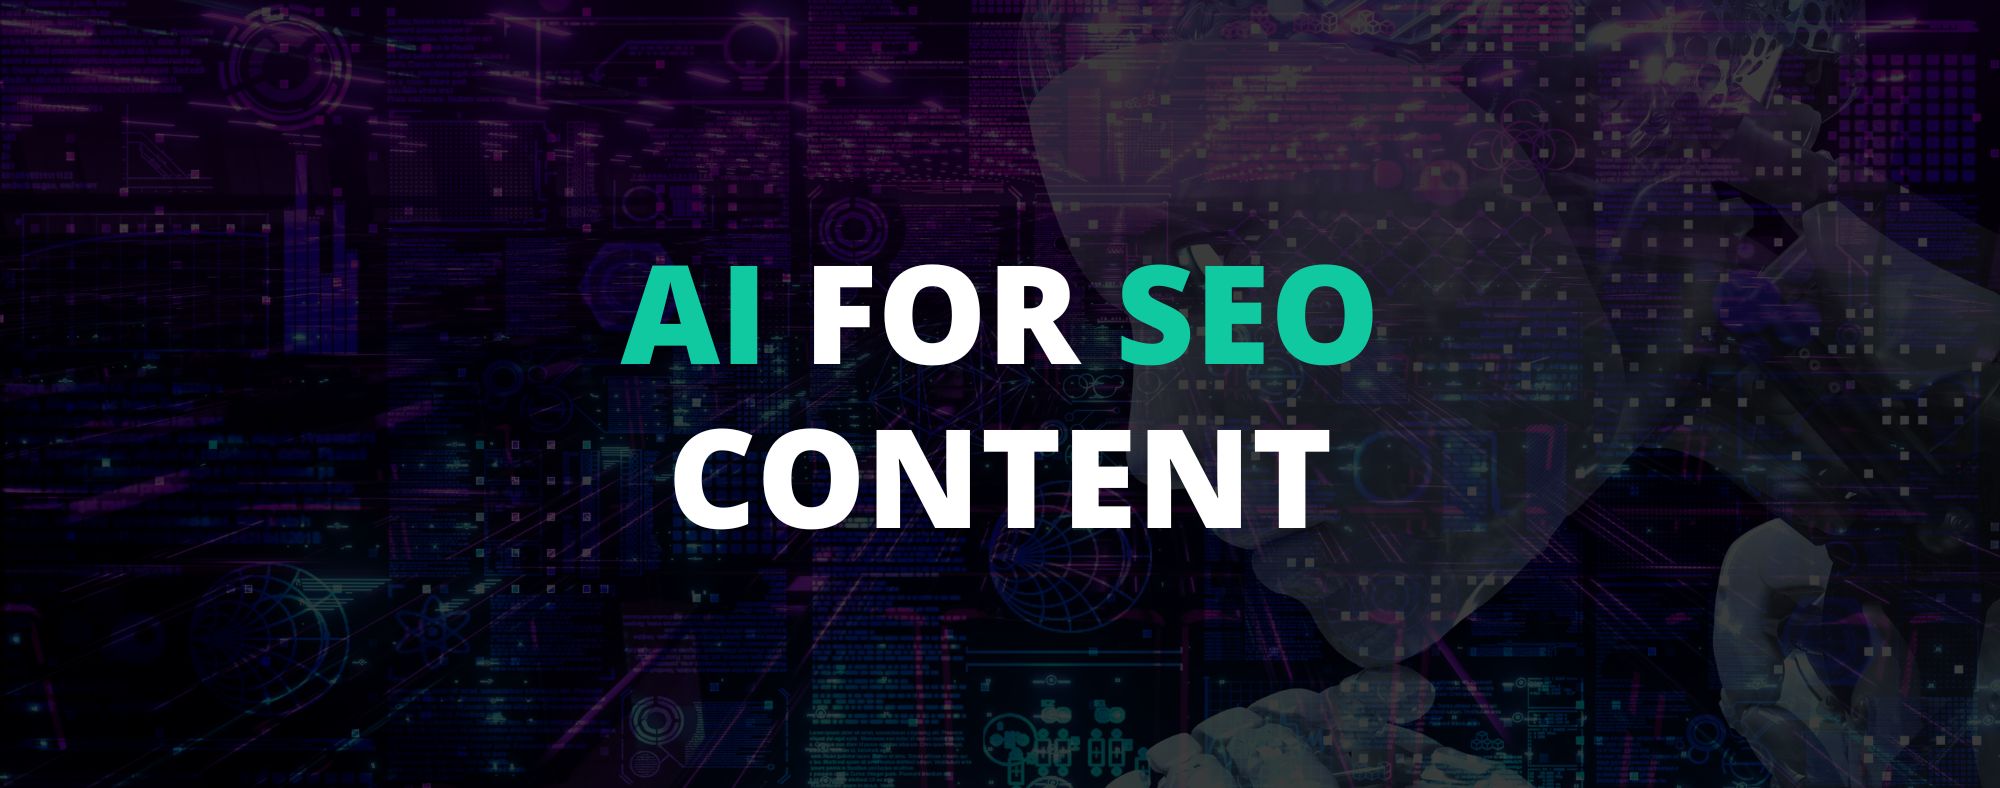 using AI for SEO Content